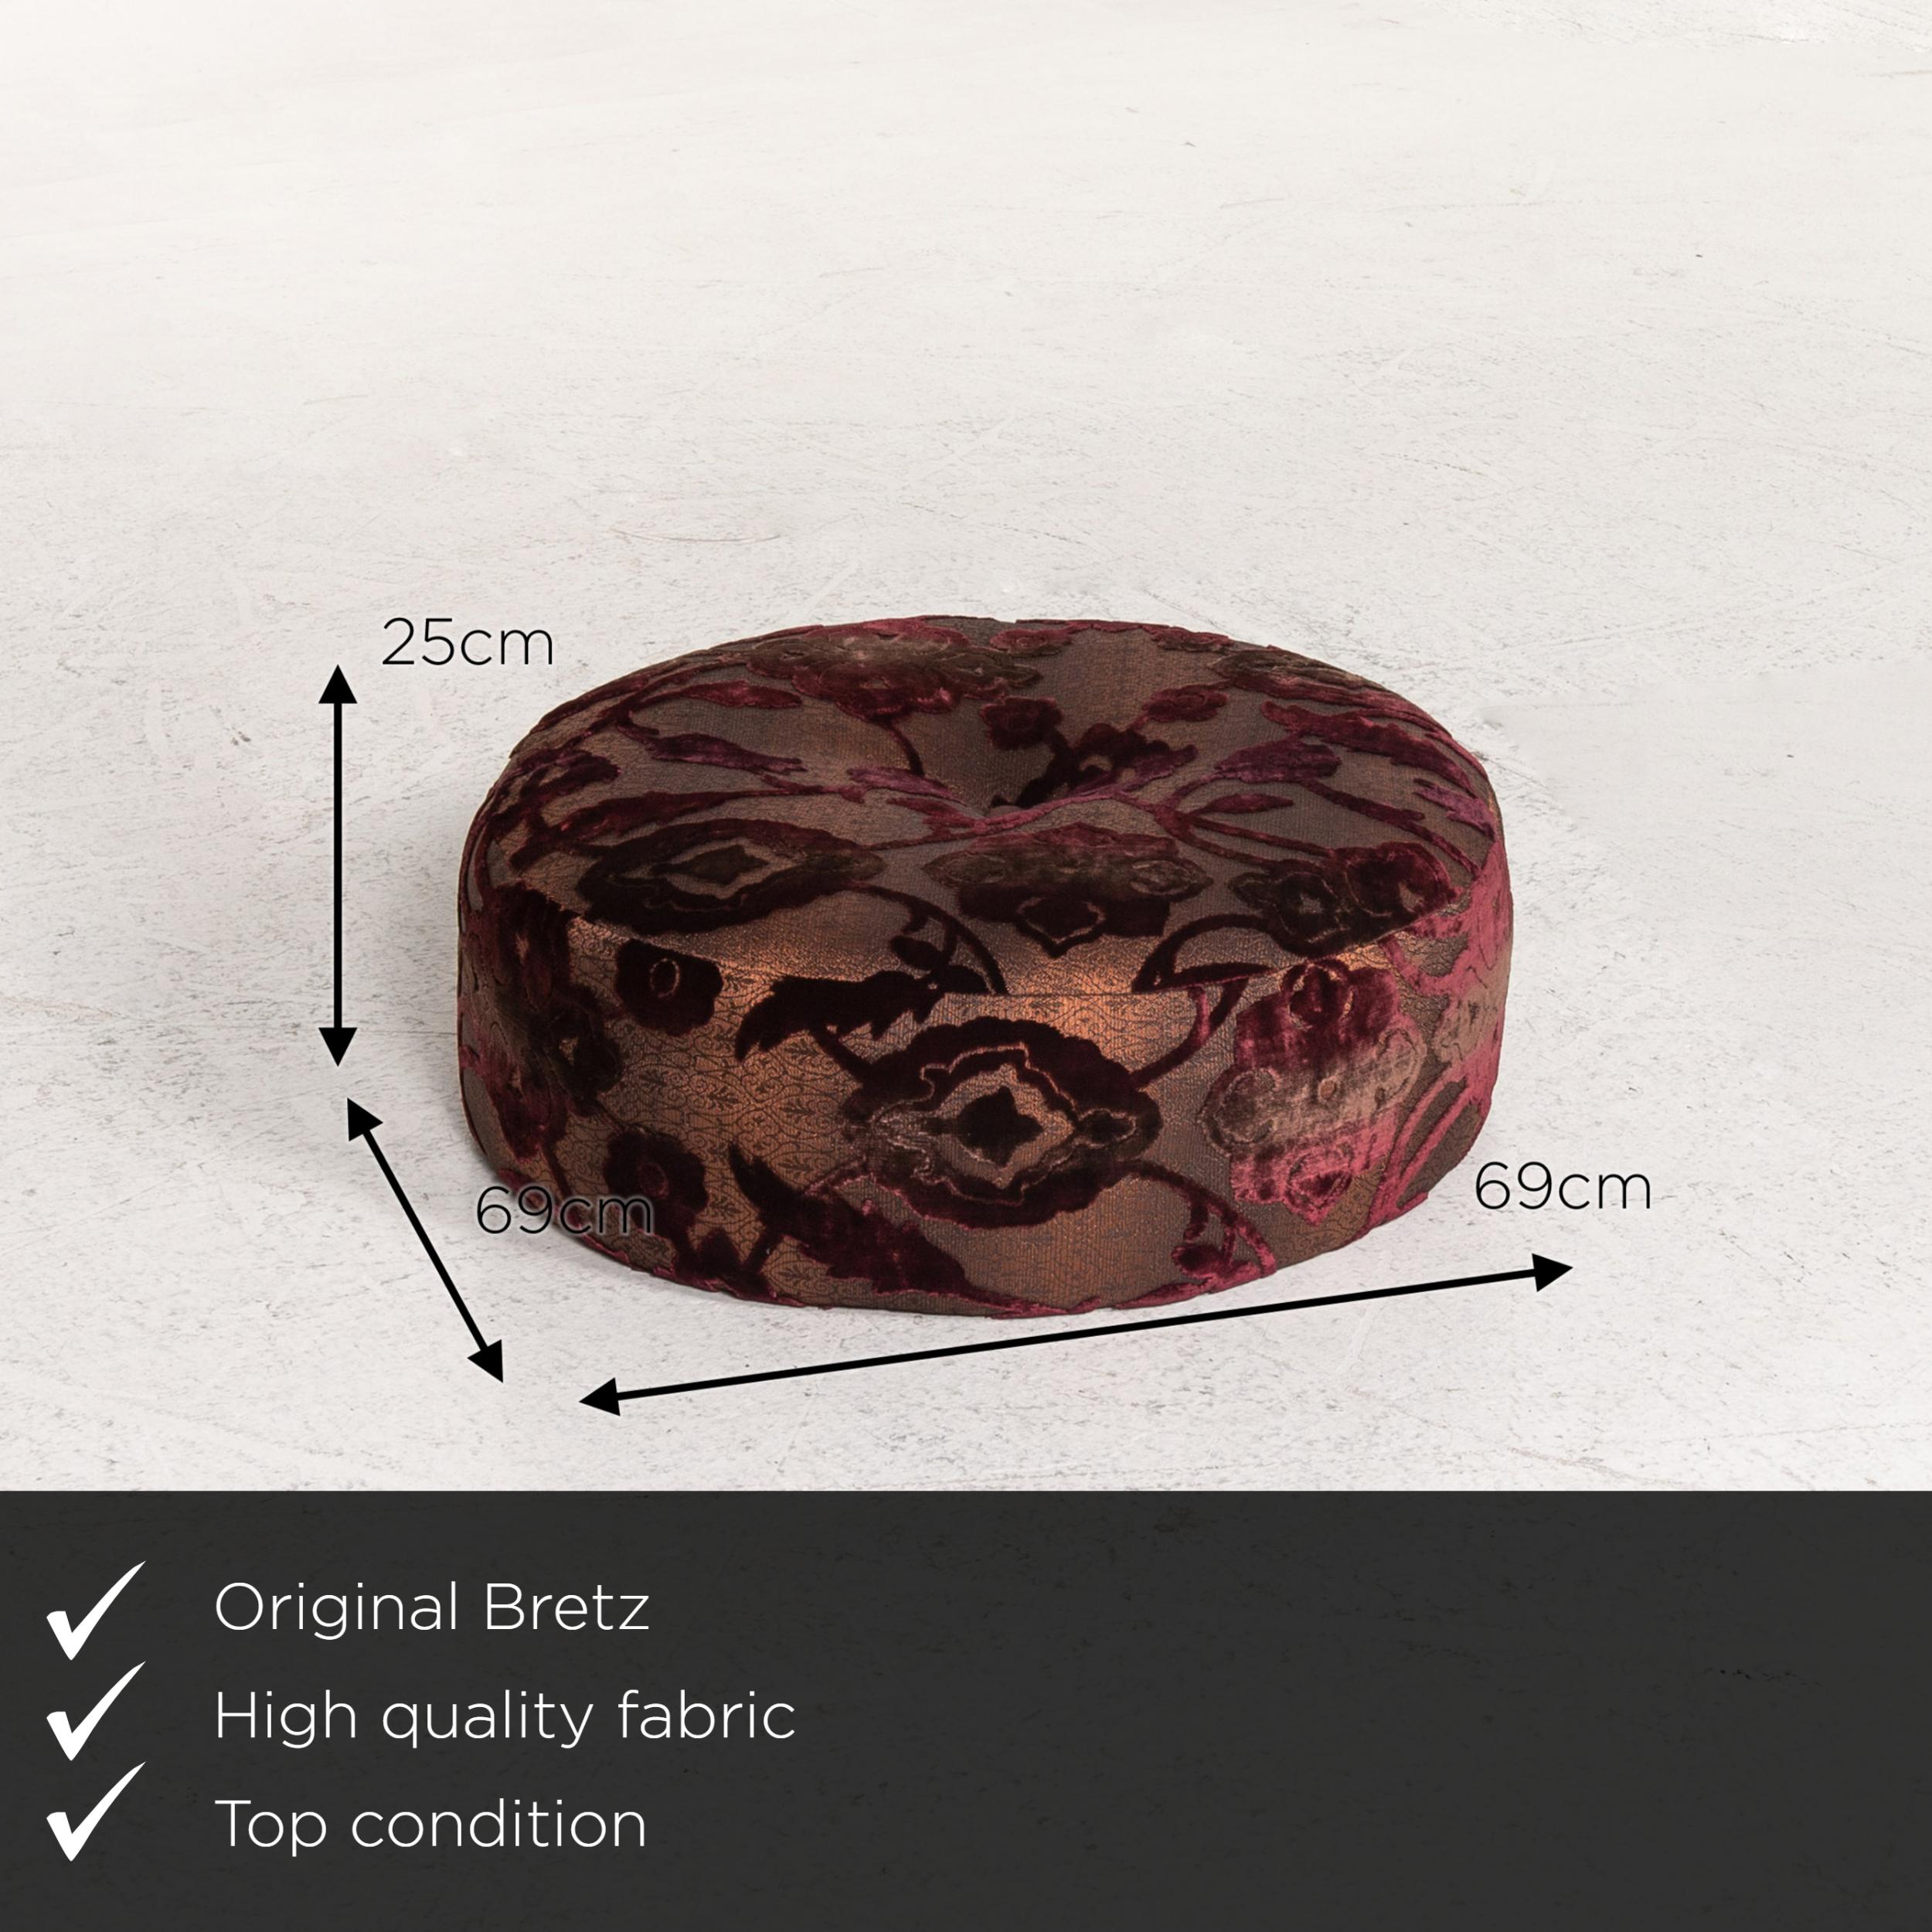 We present to you a Bretz stool velvet fabric purple patterned pouf.
   
 

 Product measurements in centimeters:
 

Depth 69
Width 69
Height 25.




  